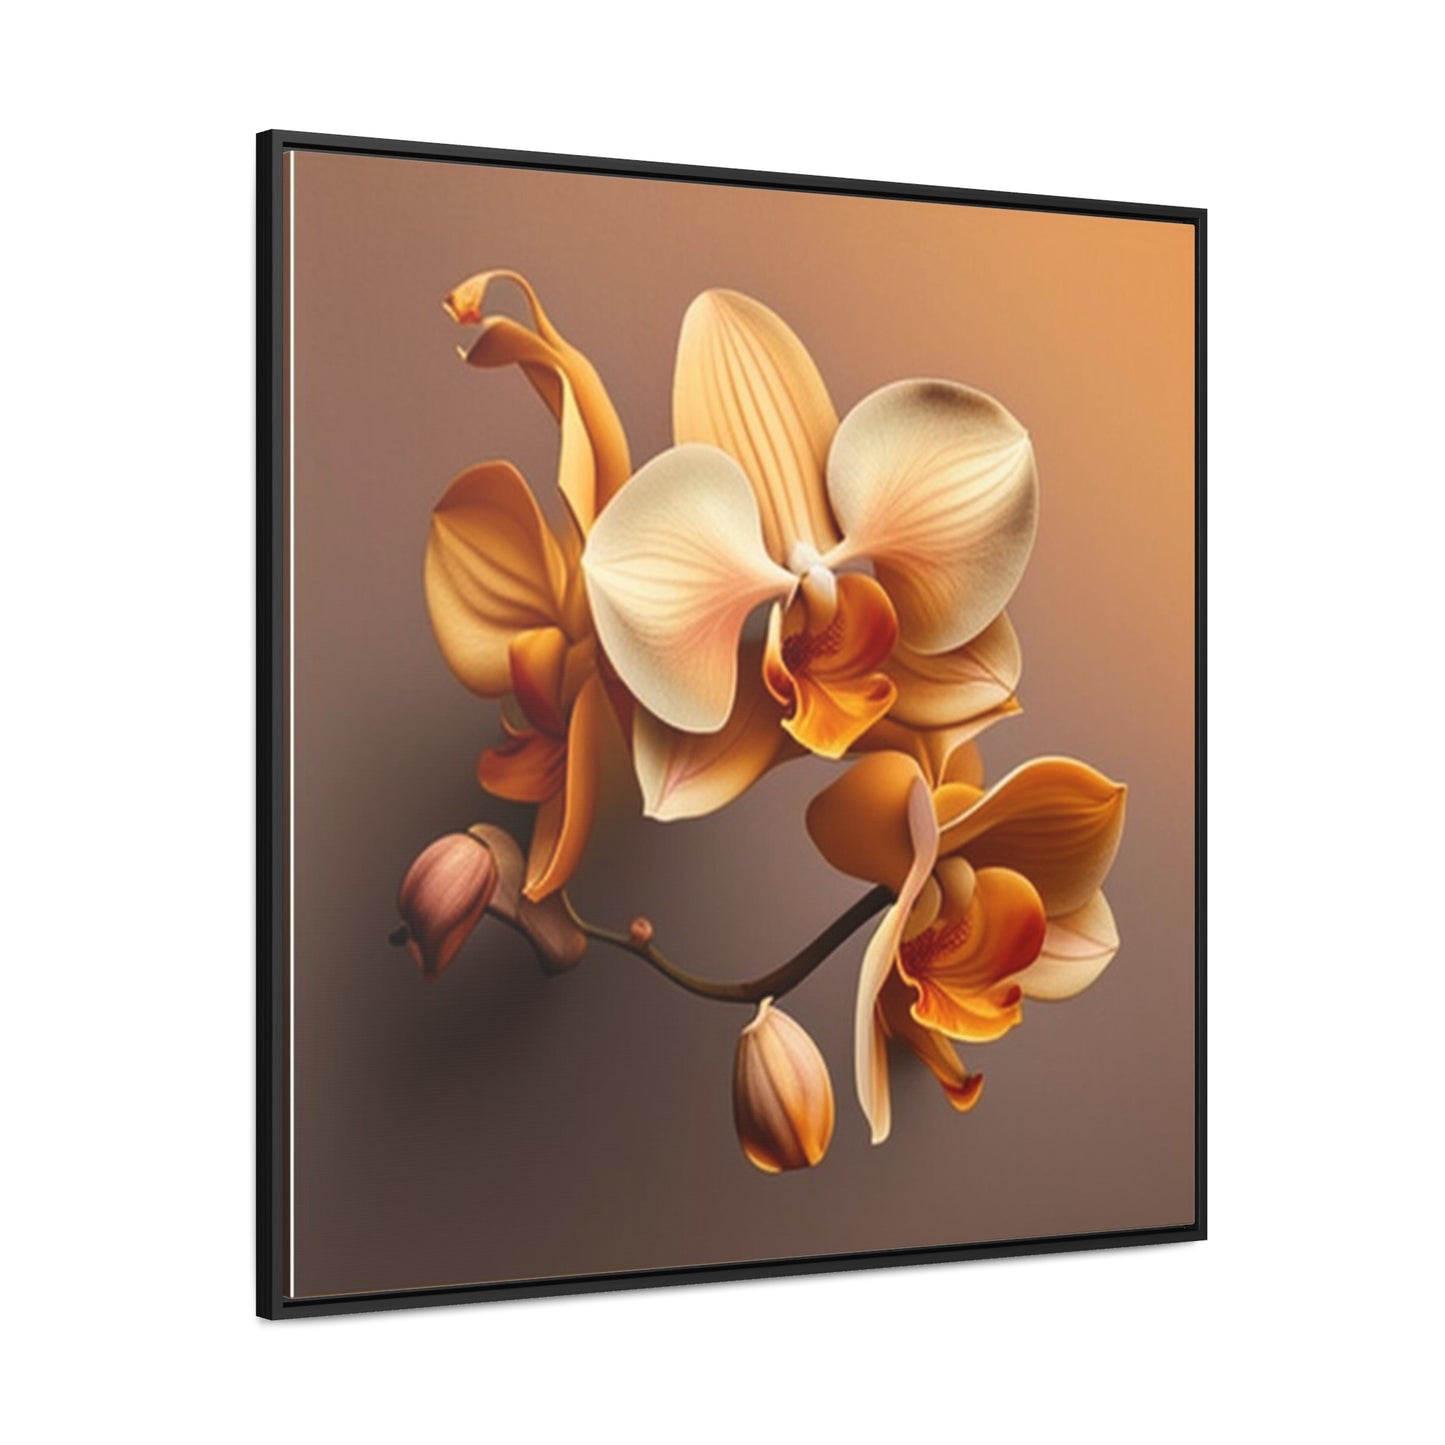 Gallery Canvas Wraps, Square Frame orchid pedals 2